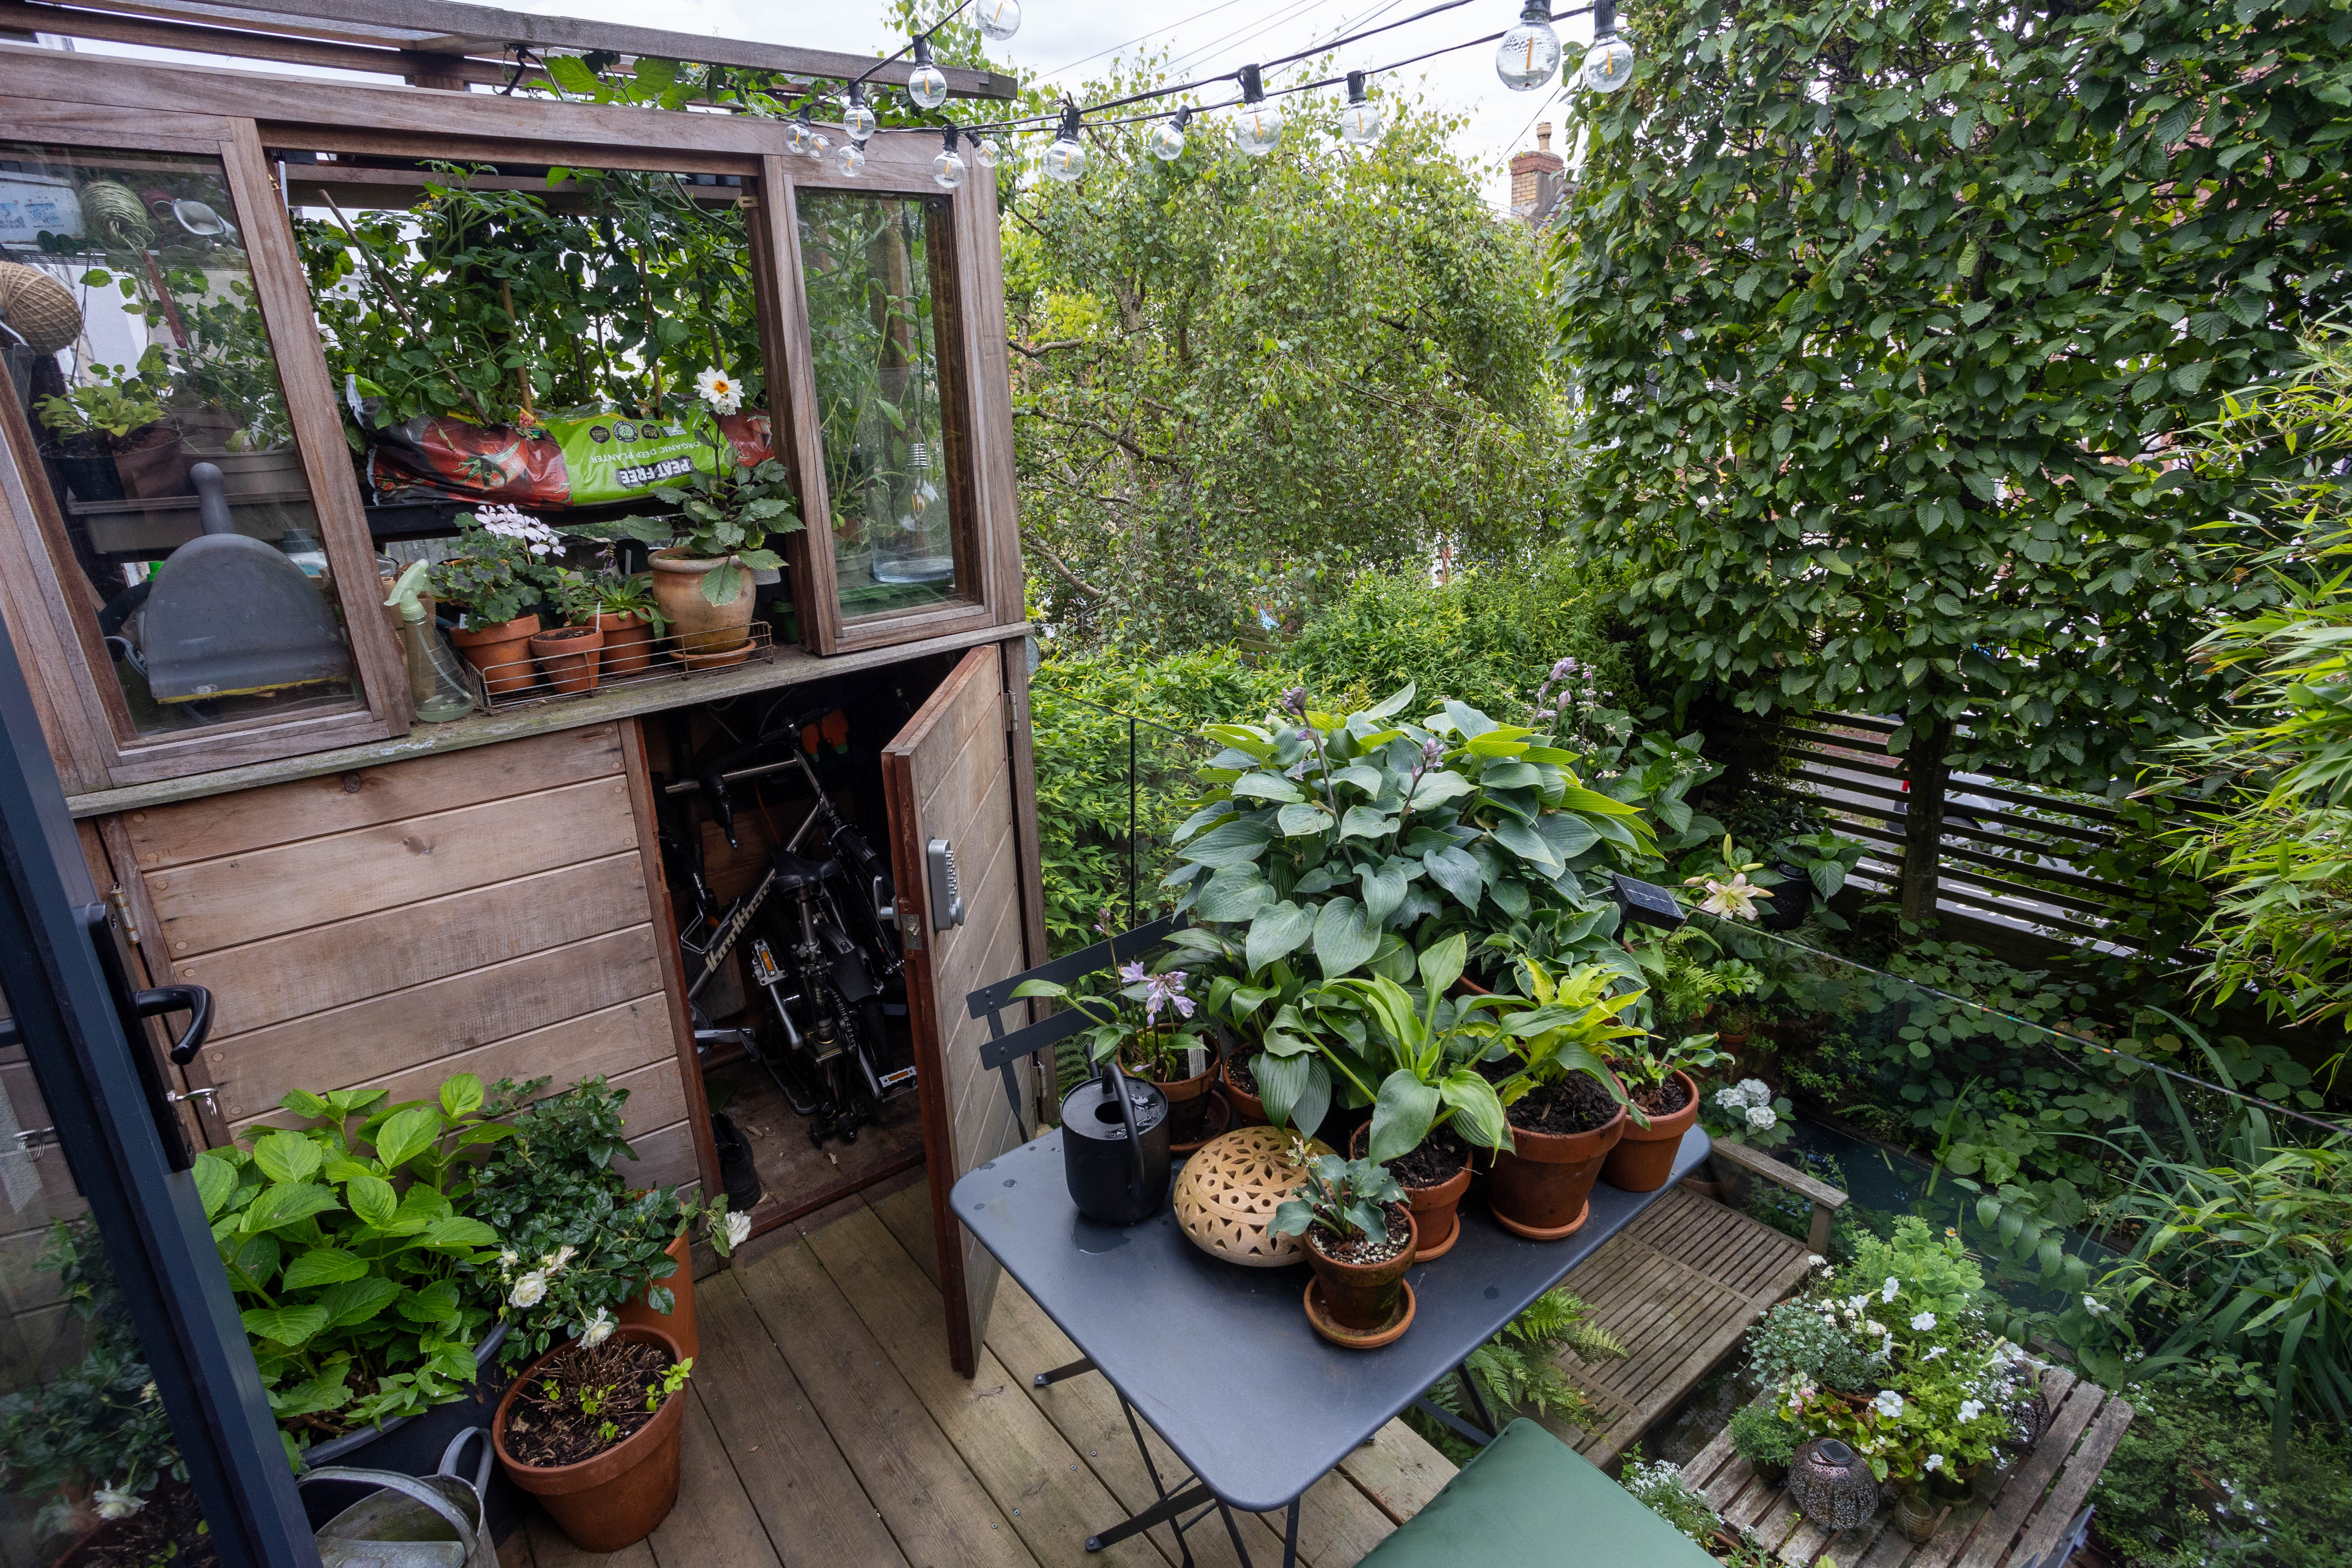 The garden includes a bike shed